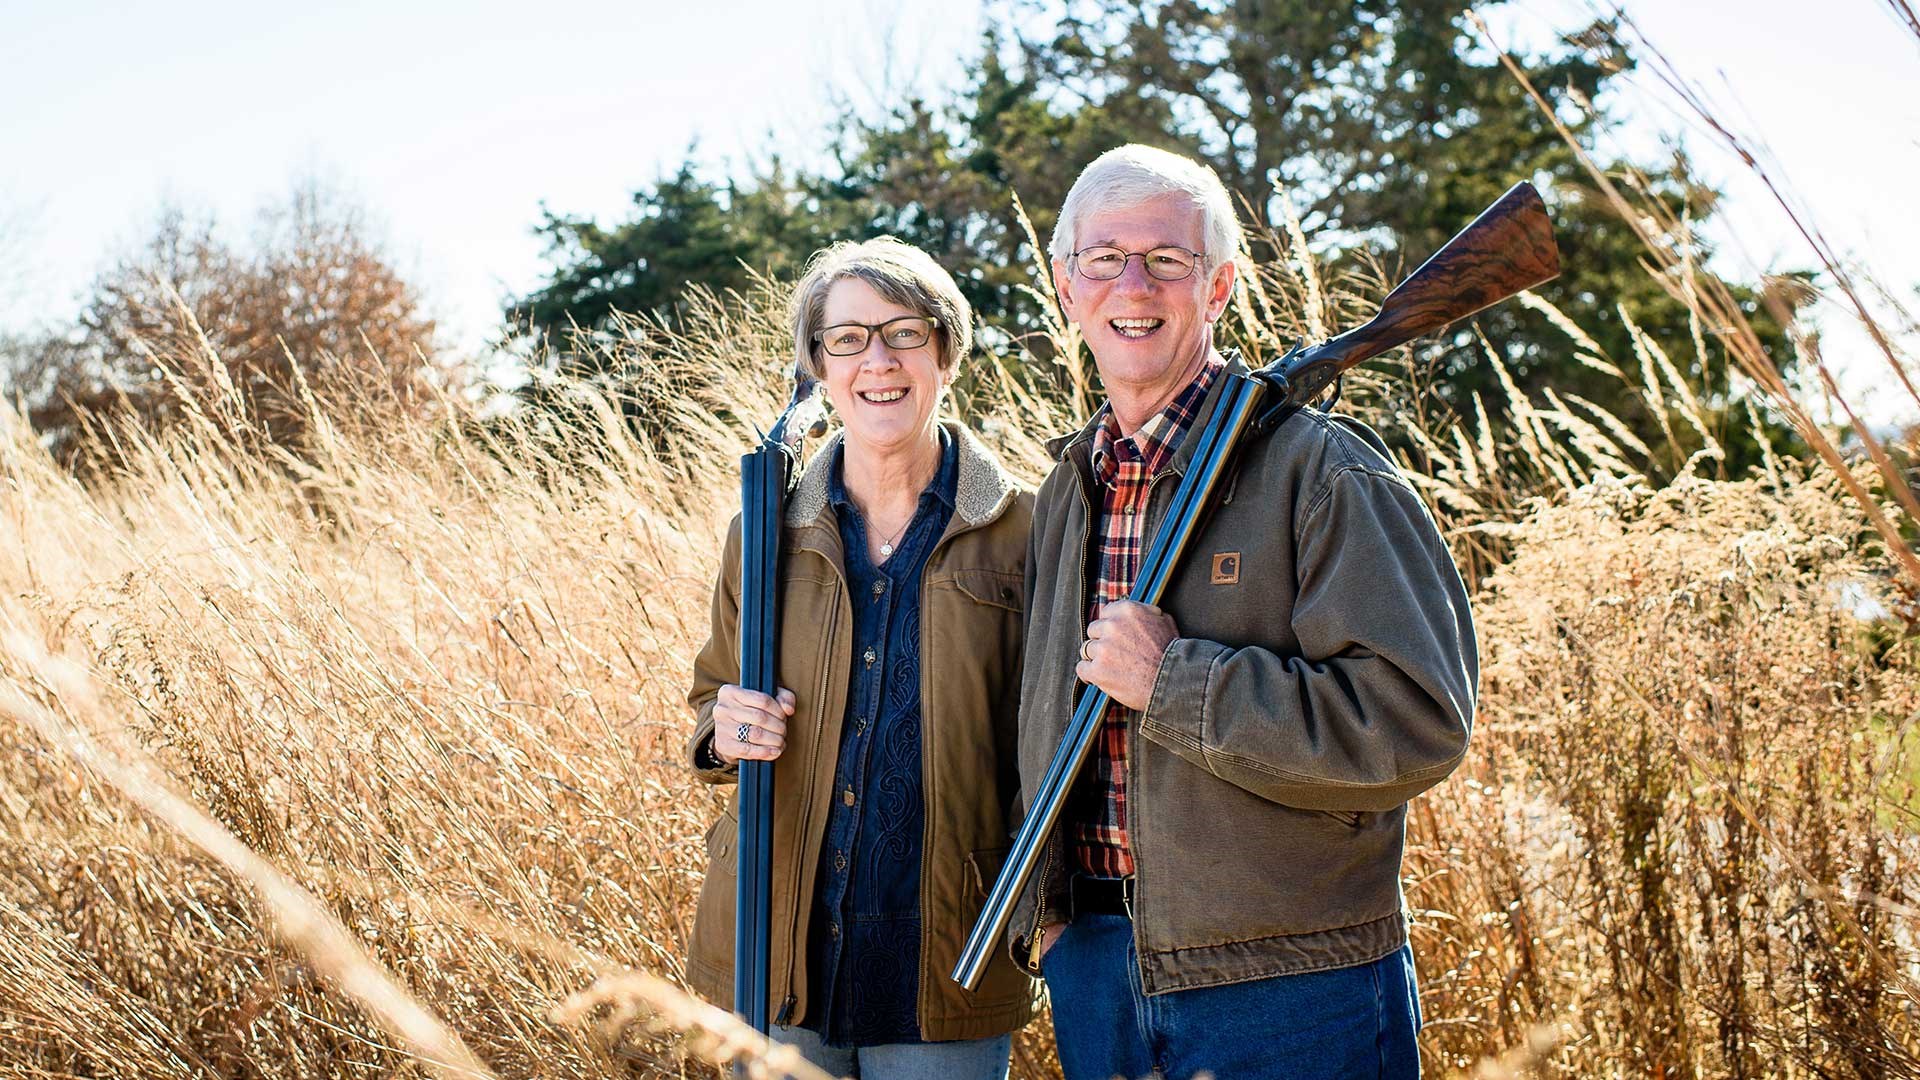 Larry and Brenda Potterfield shown in a grass field, holding shotguns.